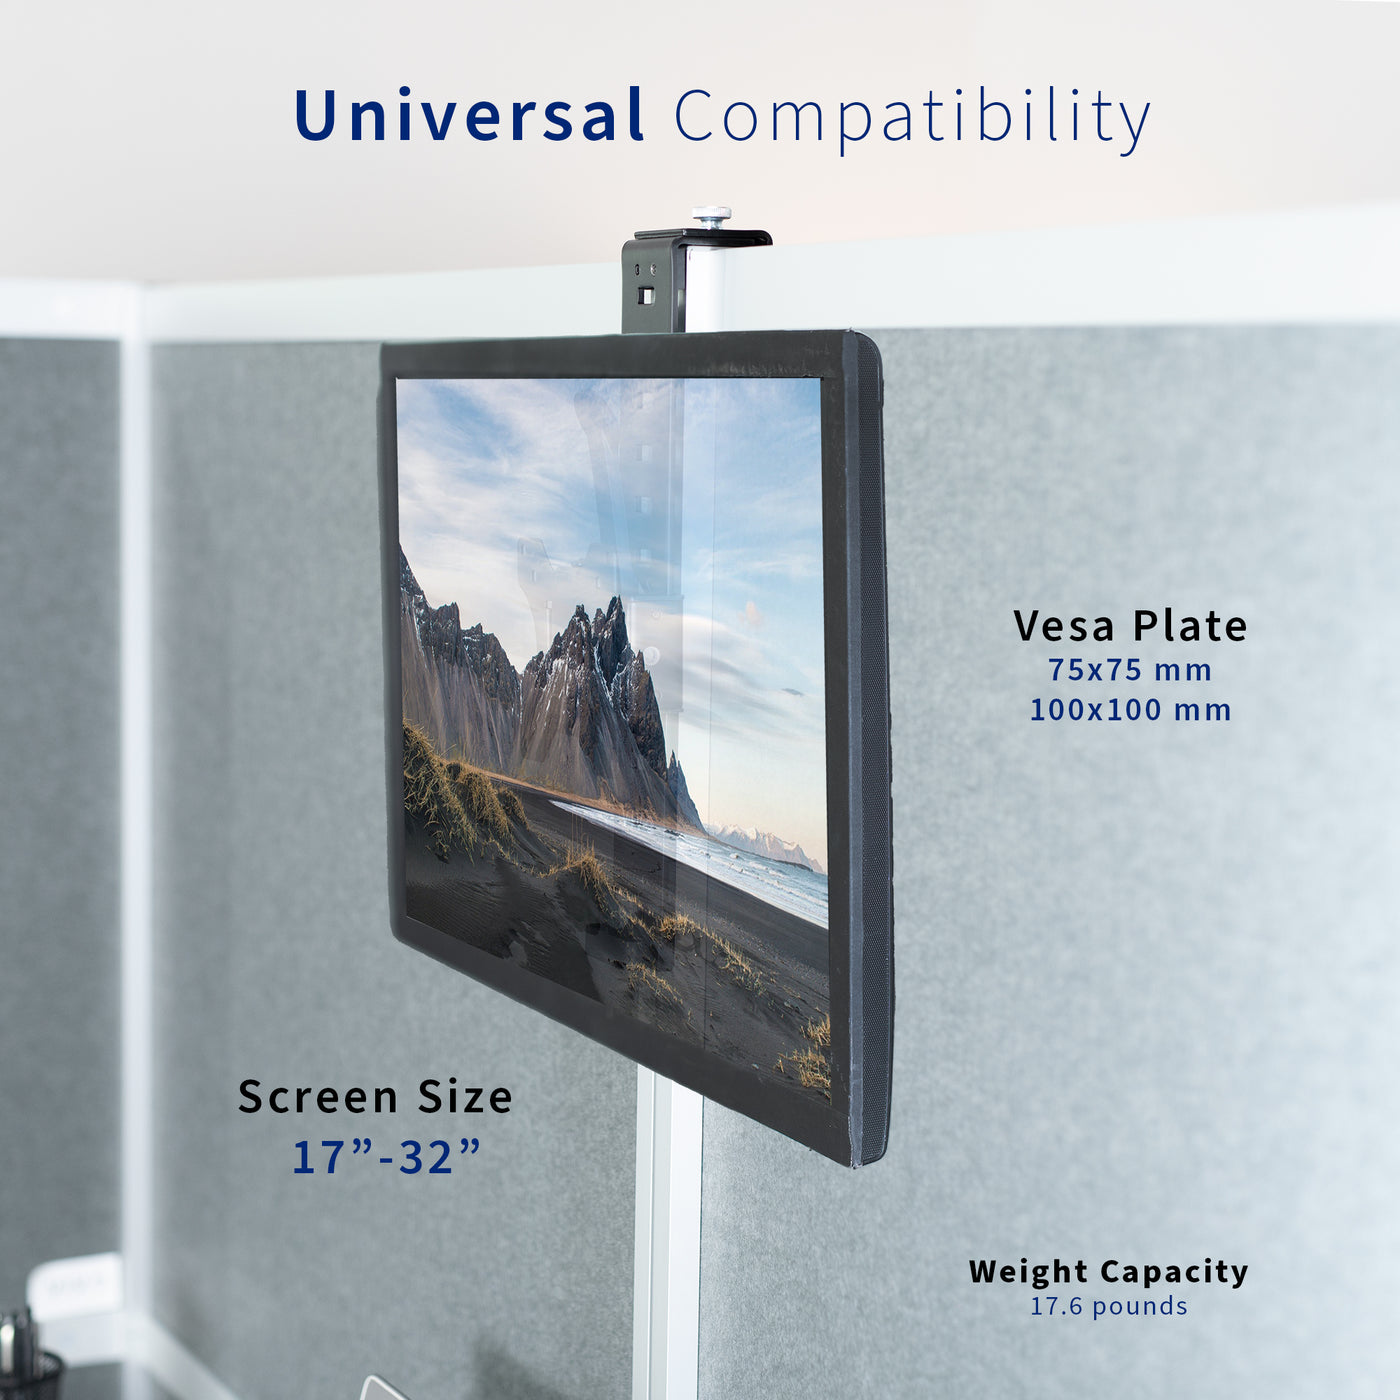 Universal compatibility provided through a standard VESA plate, screen size, and 17.6 lb weight capacity.